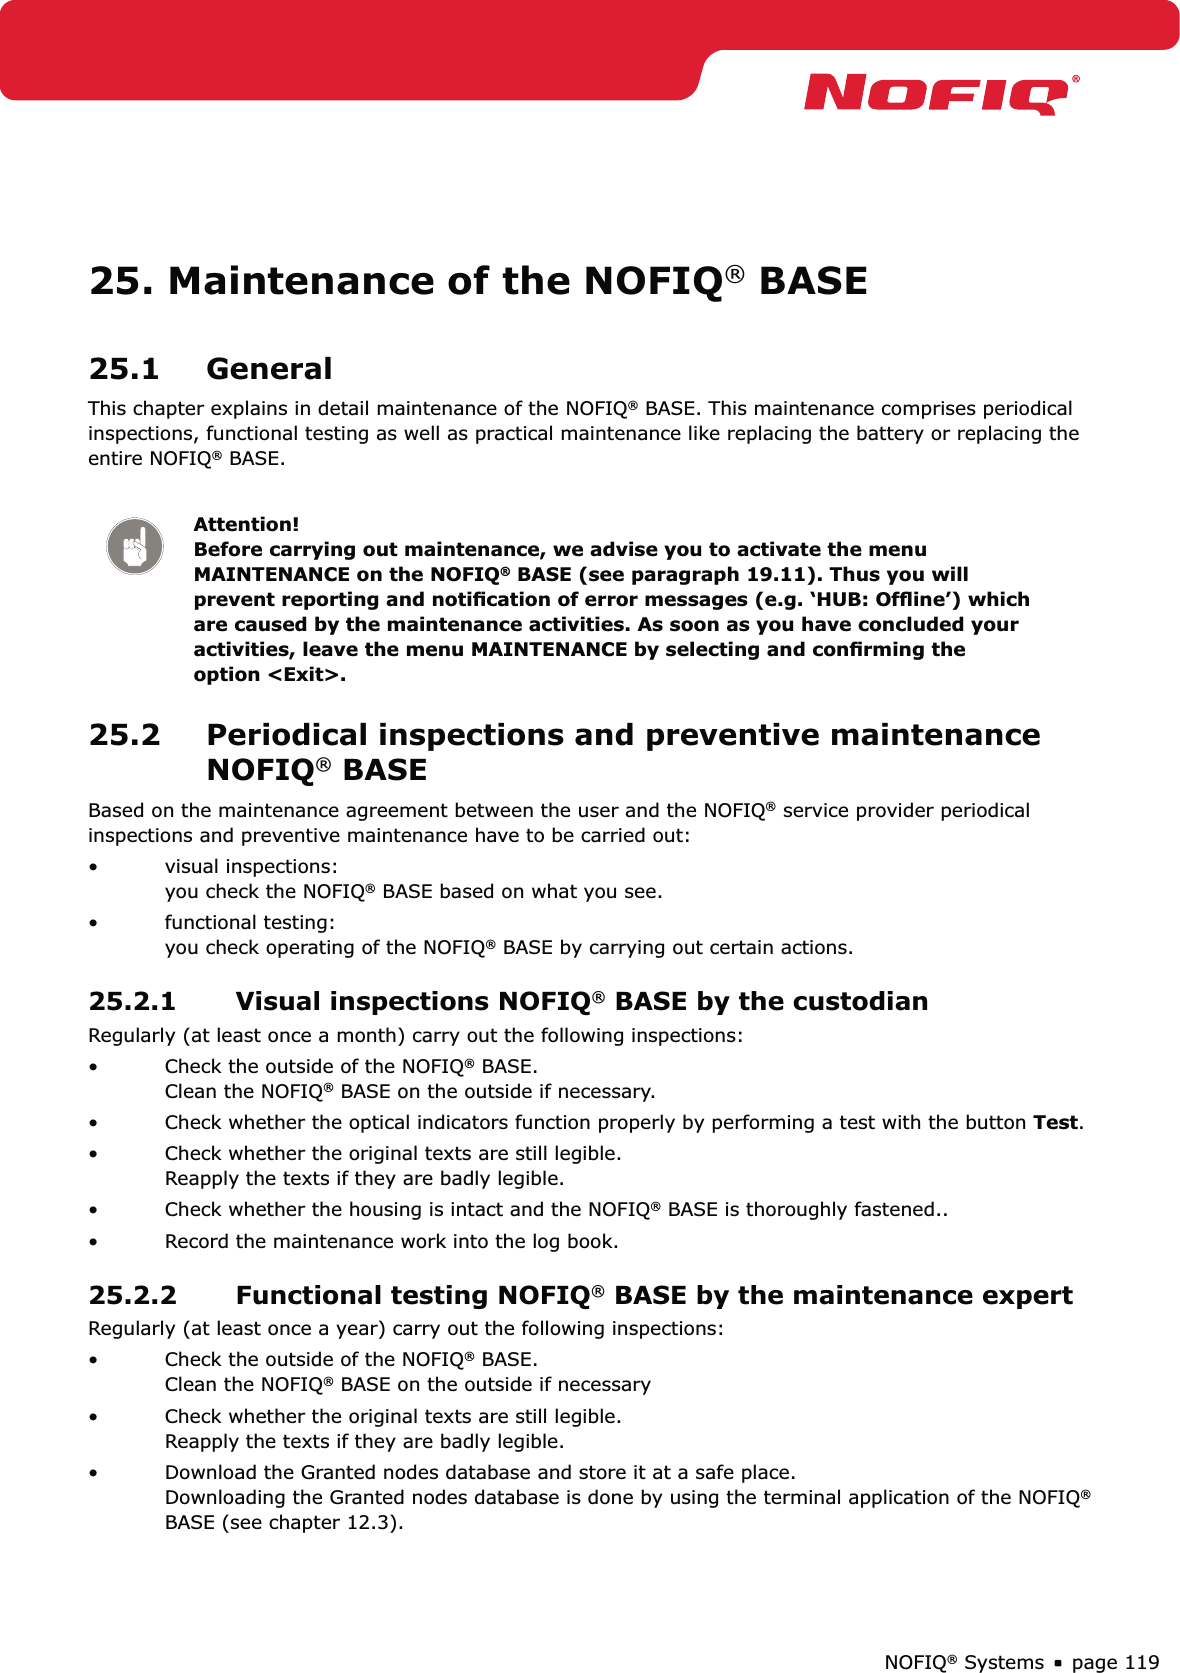 page 119NOFIQ® Systems25. Maintenance of the NOFIQ® BASE25.1 GeneralThis chapter explains in detail maintenance of the NOFIQ® BASE. This maintenance comprises periodical inspections, functional testing as well as practical maintenance like replacing the battery or replacing the entire NOFIQ® BASE.Attention! Before carrying out maintenance, we advise you to activate the menu MAINTENANCE on the NOFIQ® BASE (see paragraph 19.11). Thus you will prevent reporting and notiﬁcation of error messages (e.g. ‘HUB: Ofﬂine’) which are caused by the maintenance activities. As soon as you have concluded your activities, leave the menu MAINTENANCE by selecting and conﬁrming the option &lt;Exit&gt;. 25.2  Periodical inspections and preventive maintenance NOFIQ® BASEBased on the maintenance agreement between the user and the NOFIQ® service provider periodical inspections and preventive maintenance have to be carried out:visual inspections: • you check the NOFIQ® BASE based on what you see.functional testing: • you check operating of the NOFIQ® BASE by carrying out certain actions.25.2.1  Visual inspections NOFIQ® BASE by the custodianRegularly (at least once a month) carry out the following inspections:Check the outside of the NOFIQ•  ® BASE. Clean the NOFIQ® BASE on the outside if necessary.Check whether the optical indicators function properly by performing a test with the button •  Test.Check whether the original texts are still legible. • Reapply the texts if they are badly legible.Check whether the housing is intact and the NOFIQ•  ® BASE is thoroughly fastened..Record the maintenance work into the log book.• 25.2.2  Functional testing NOFIQ® BASE by the maintenance expert Regularly (at least once a year) carry out the following inspections:Check the outside of the NOFIQ•  ® BASE. Clean the NOFIQ® BASE on the outside if necessaryCheck whether the original texts are still legible. • Reapply the texts if they are badly legible.Download the Granted nodes database and store it at a safe place.  • Downloading the Granted nodes database is done by using the terminal application of the NOFIQ® BASE (see chapter 12.3).